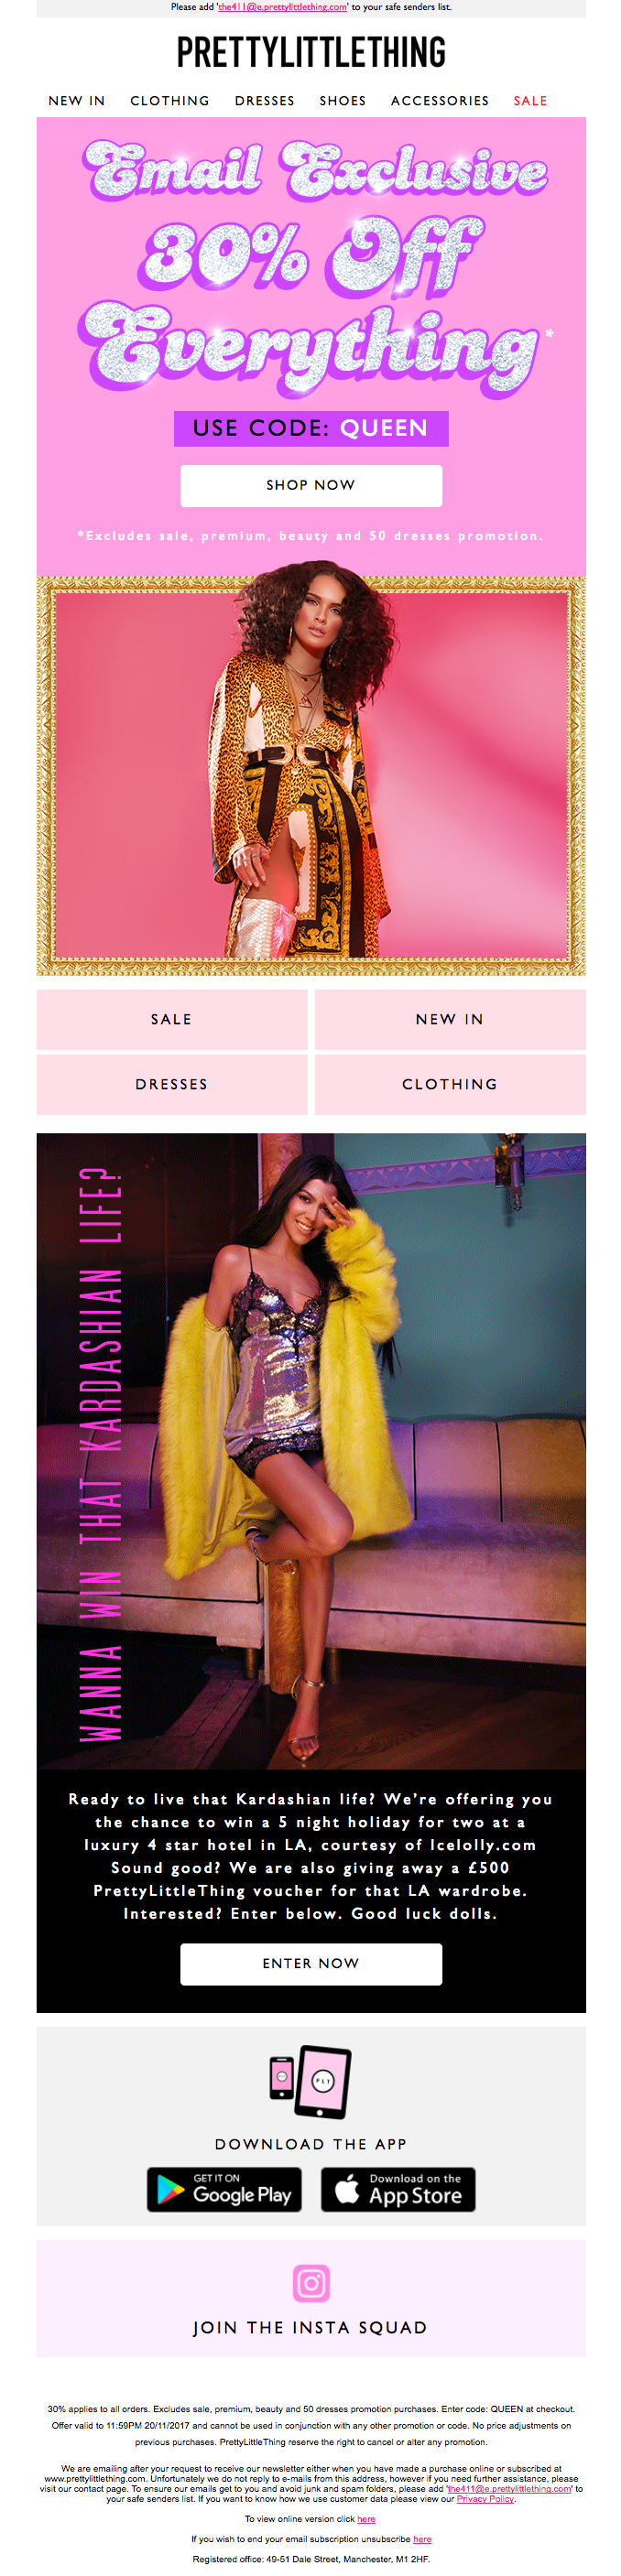 PrettyLittleThing's exclusive discount in the email